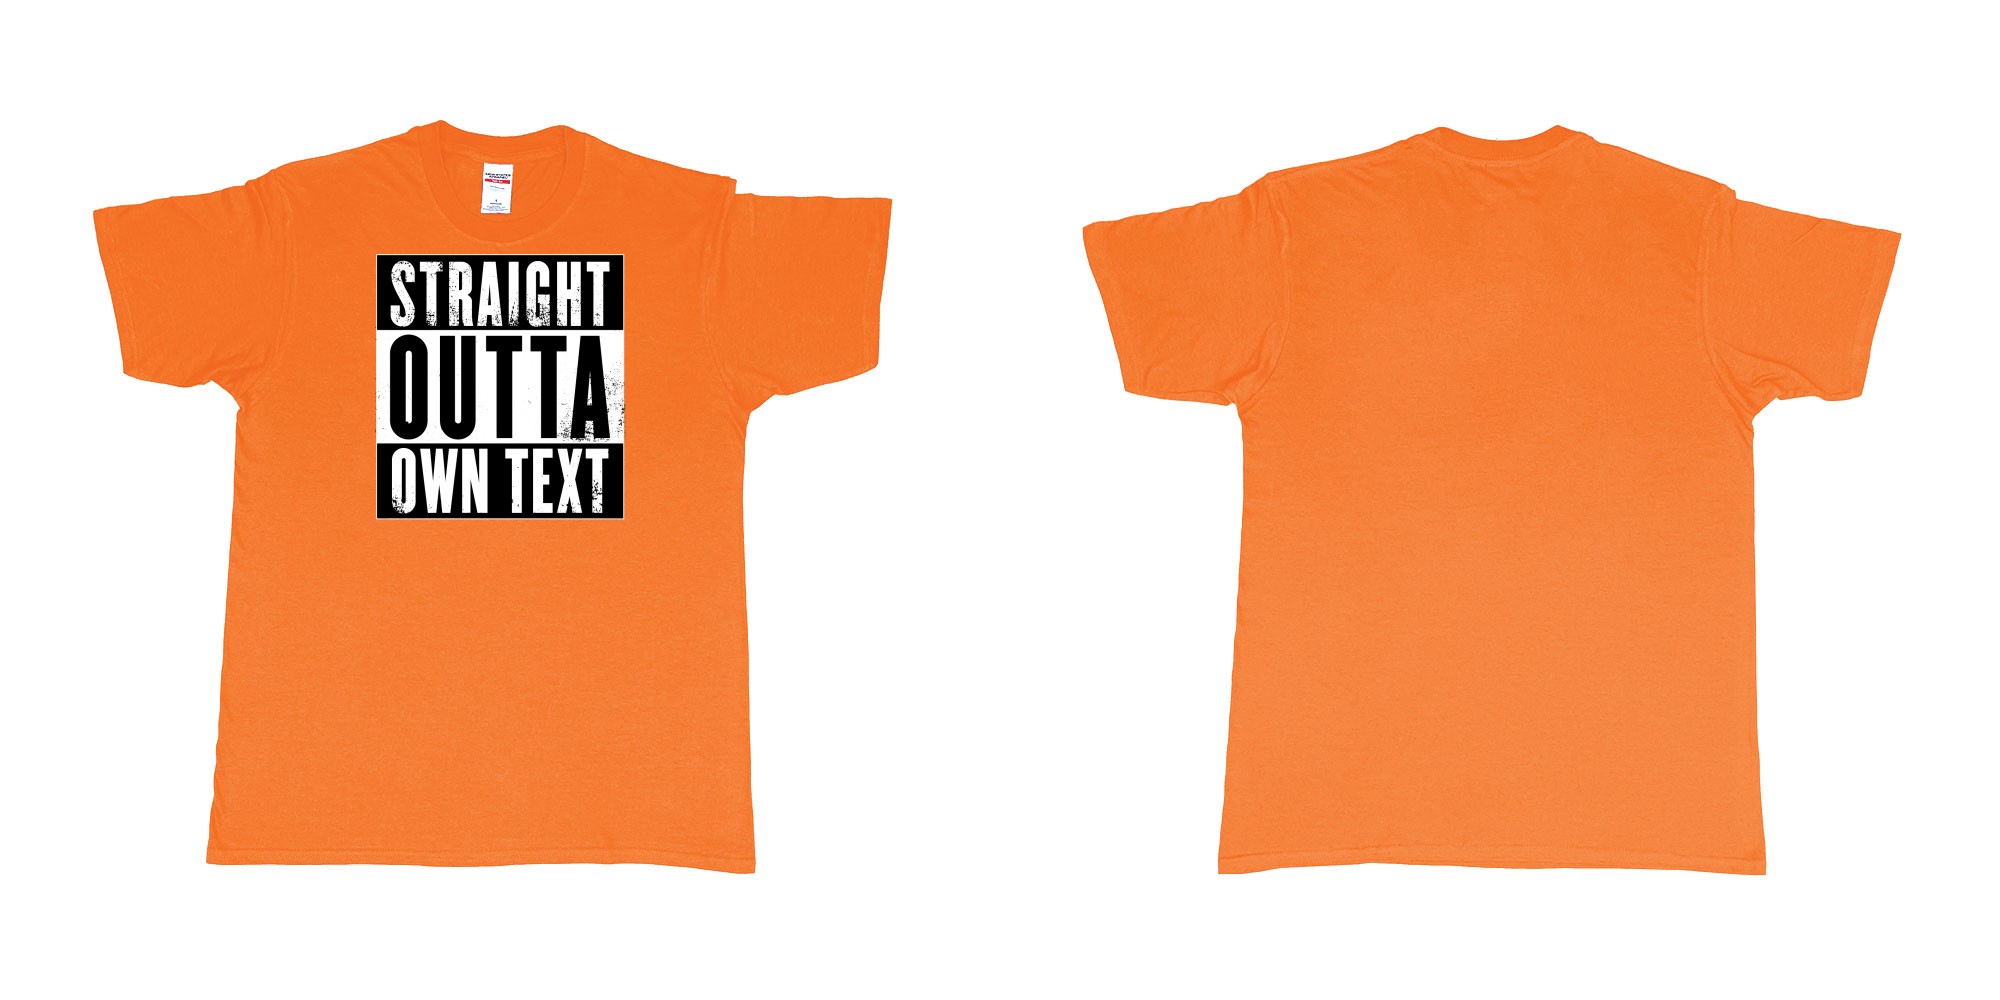 Custom tshirt design Straight Outta Compton in fabric color orange choice your own text made in Bali by The Pirate Way